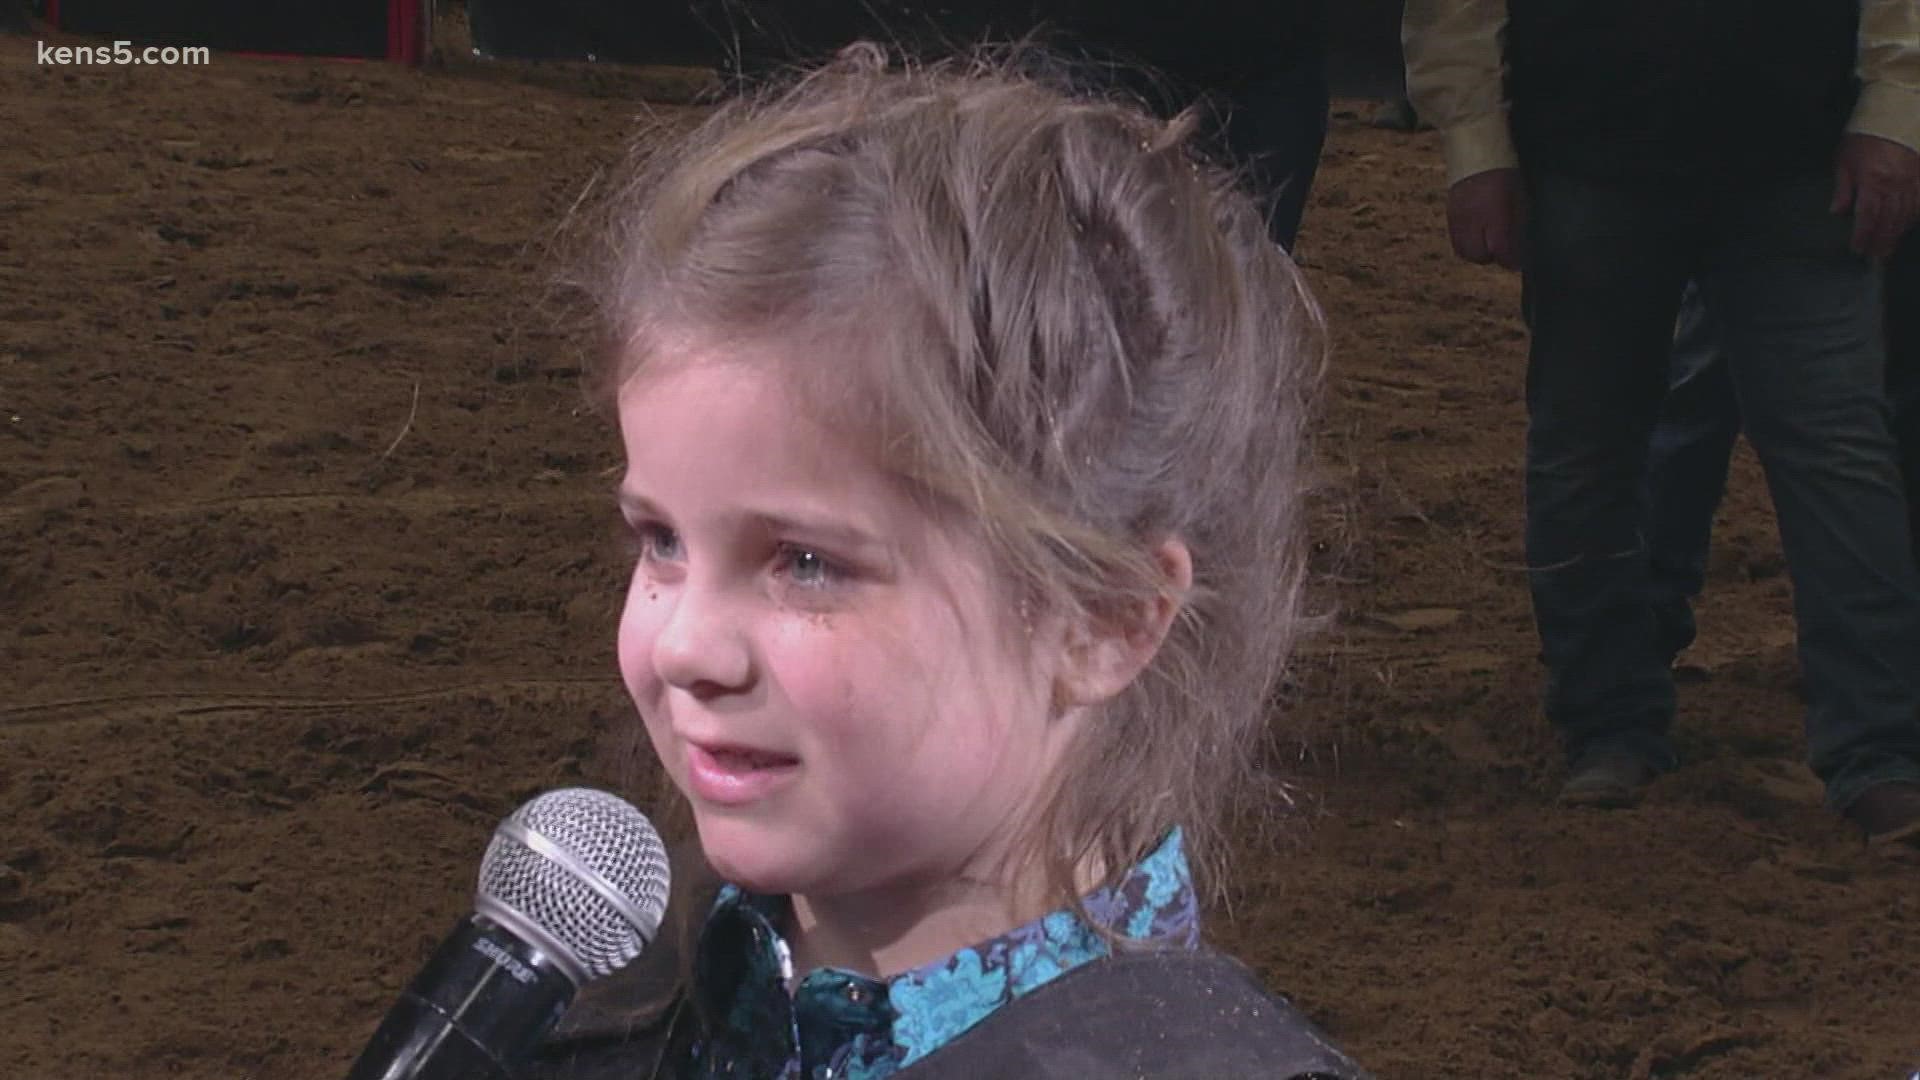 The 6-year-old from Boerne got 90 points for her ride.